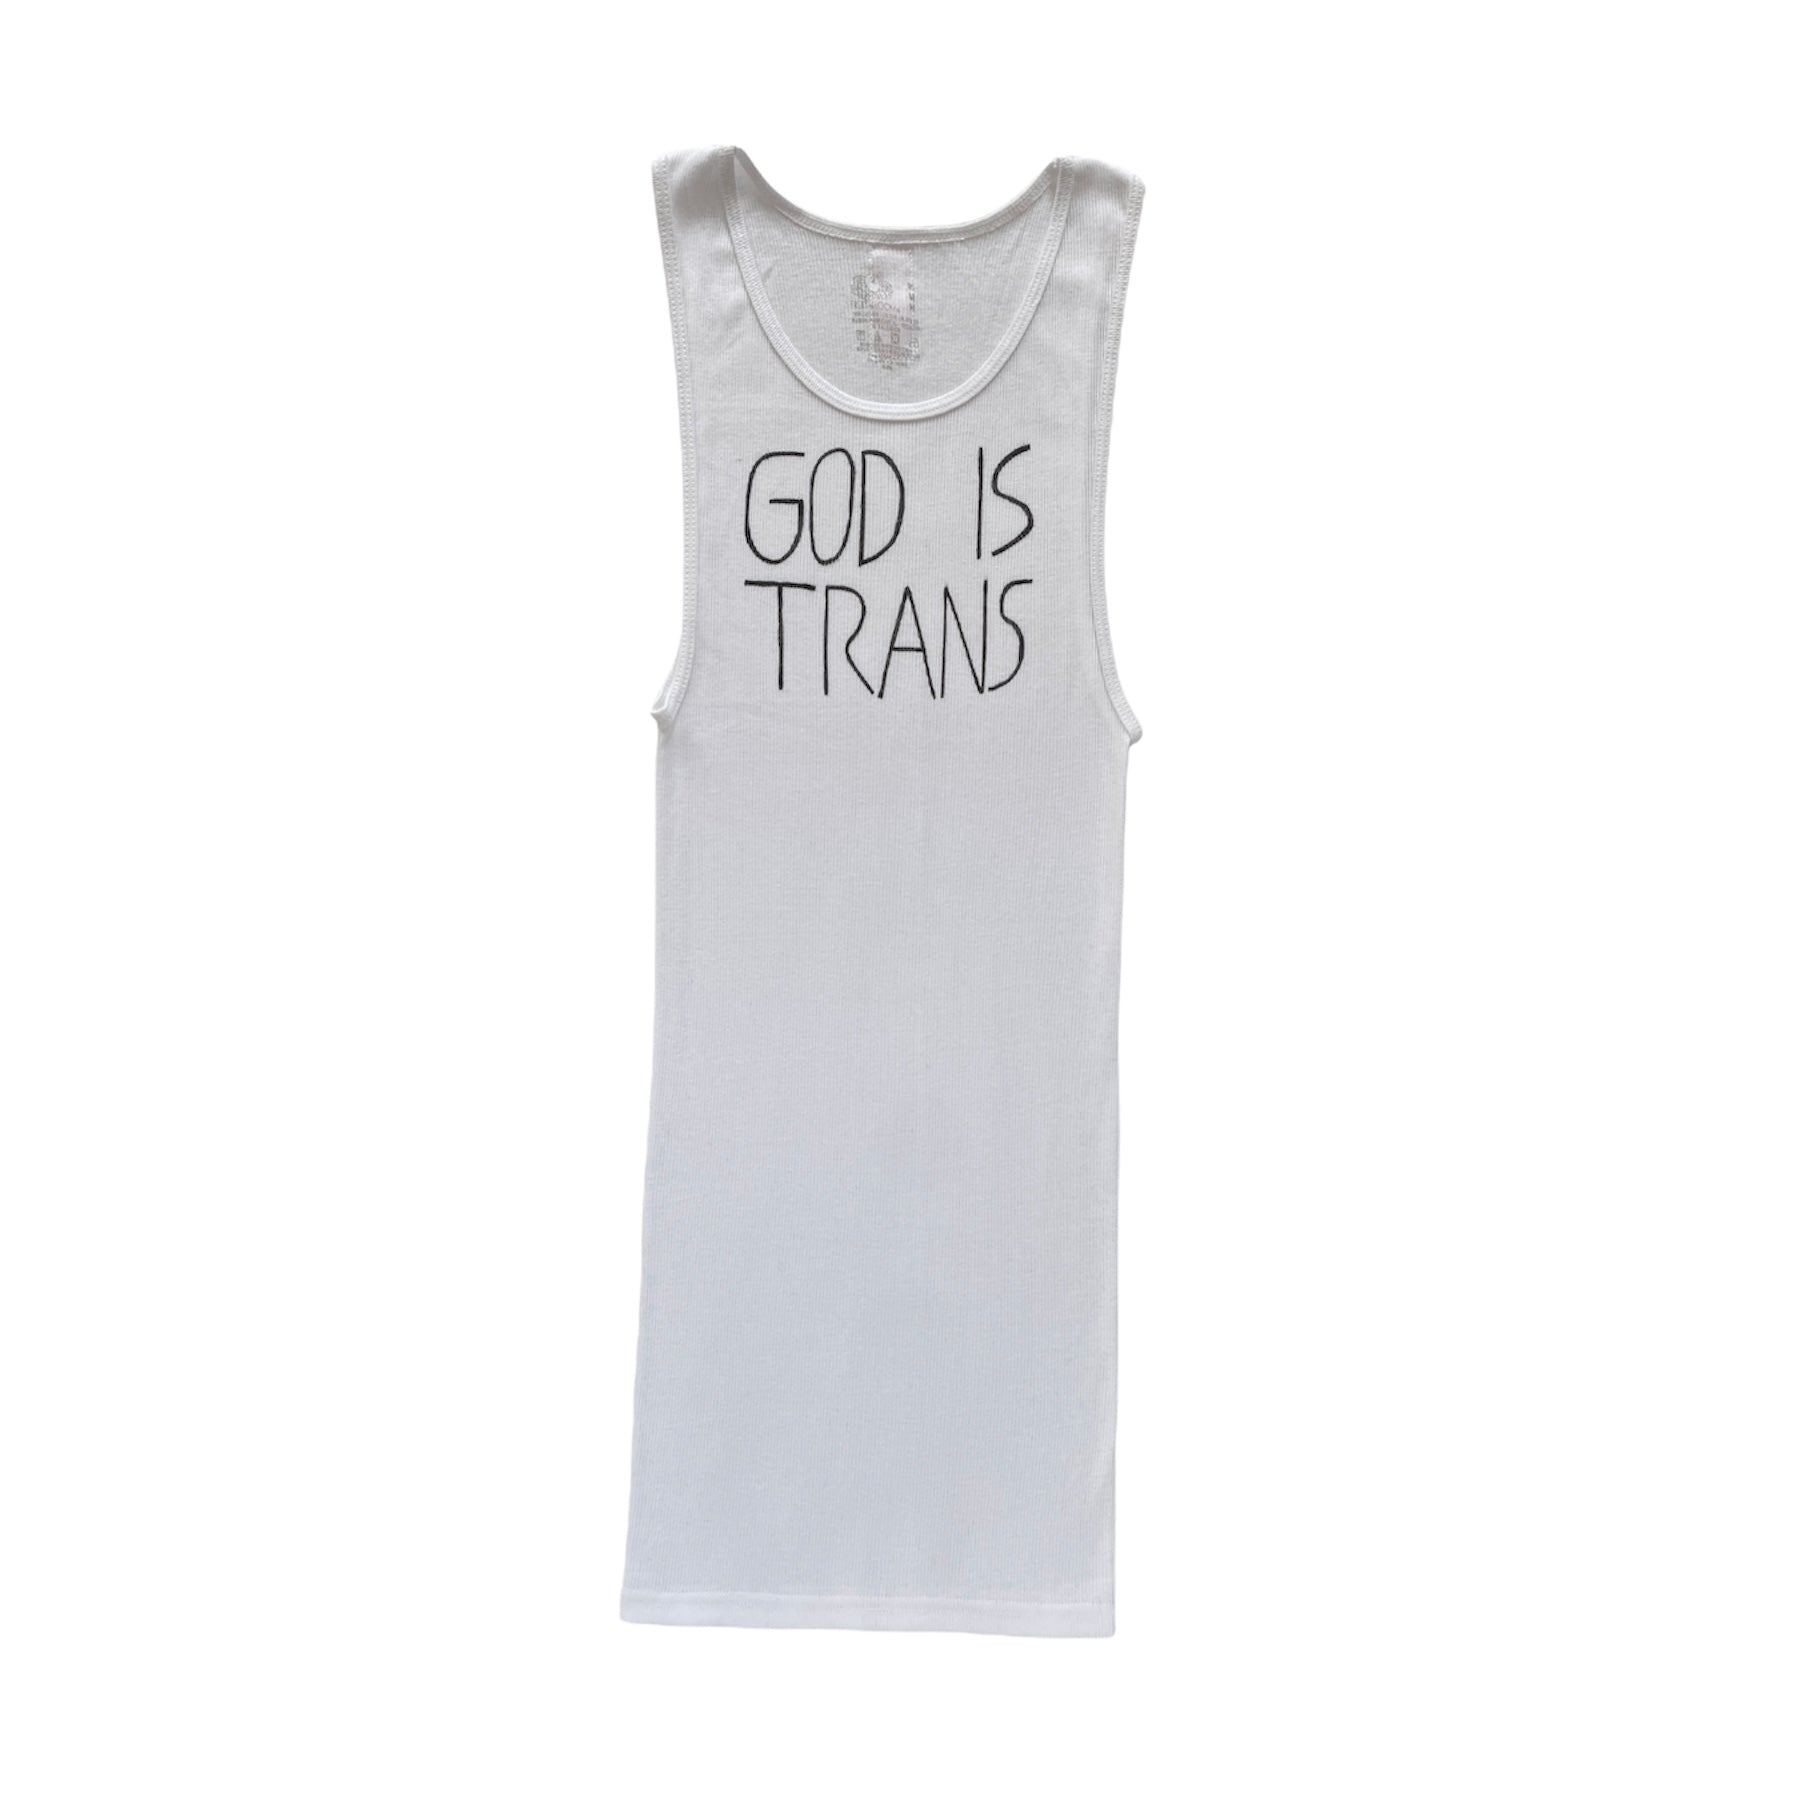 white ribbed A-shirt tank top with hand drawn text reading GOD IS TRANS in black fabric marker across the chest